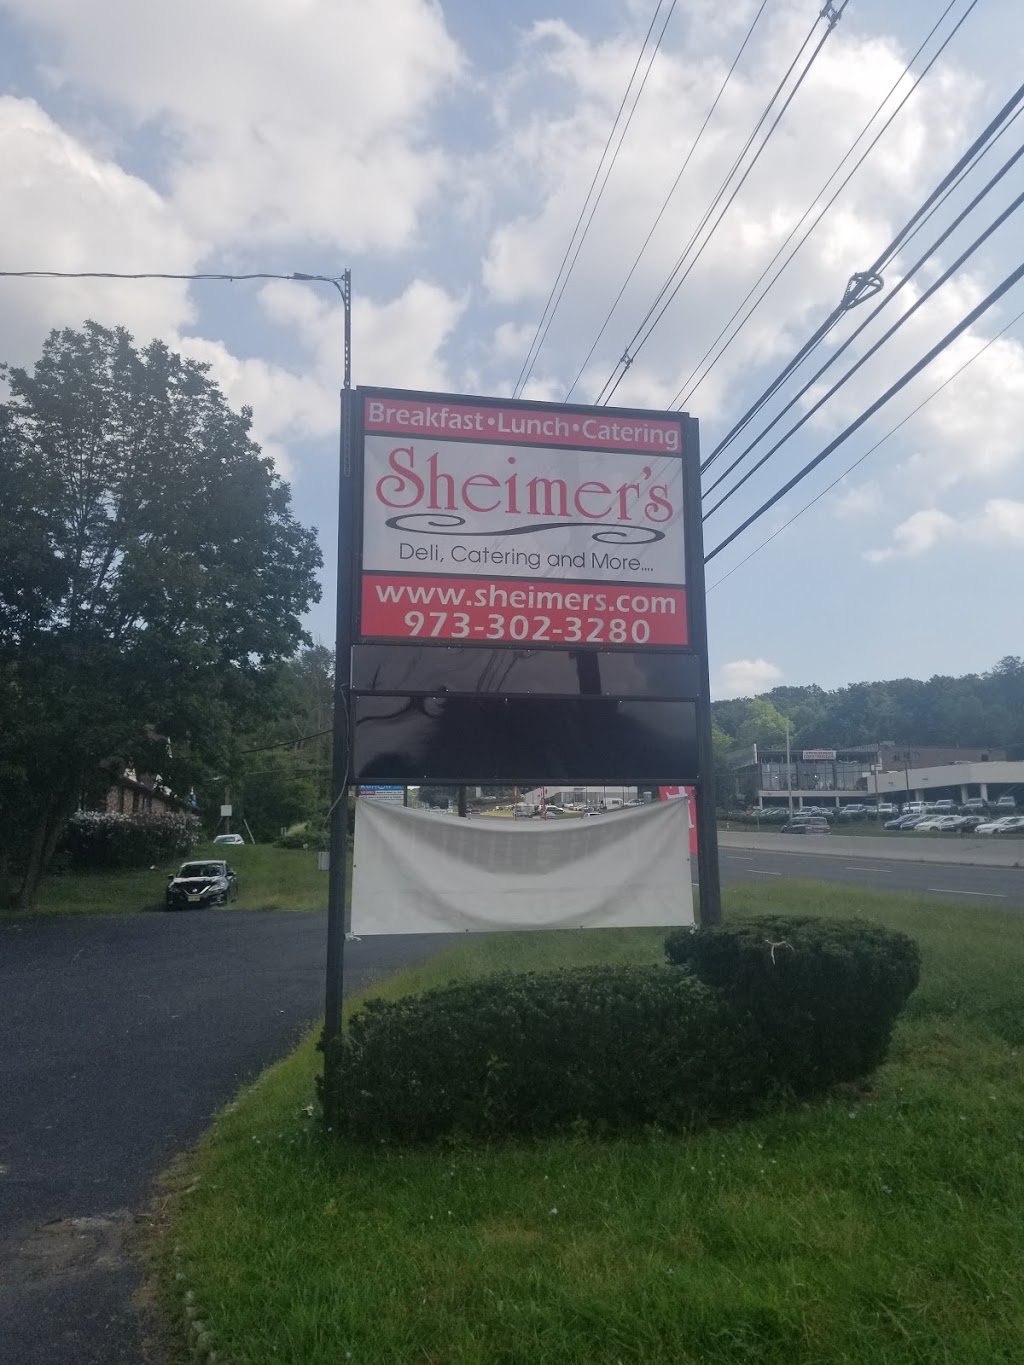 Sheimers Deli Catering and More | 3110 NJ-10 W, Denville, NJ 07834 | Phone: (973) 302-3280